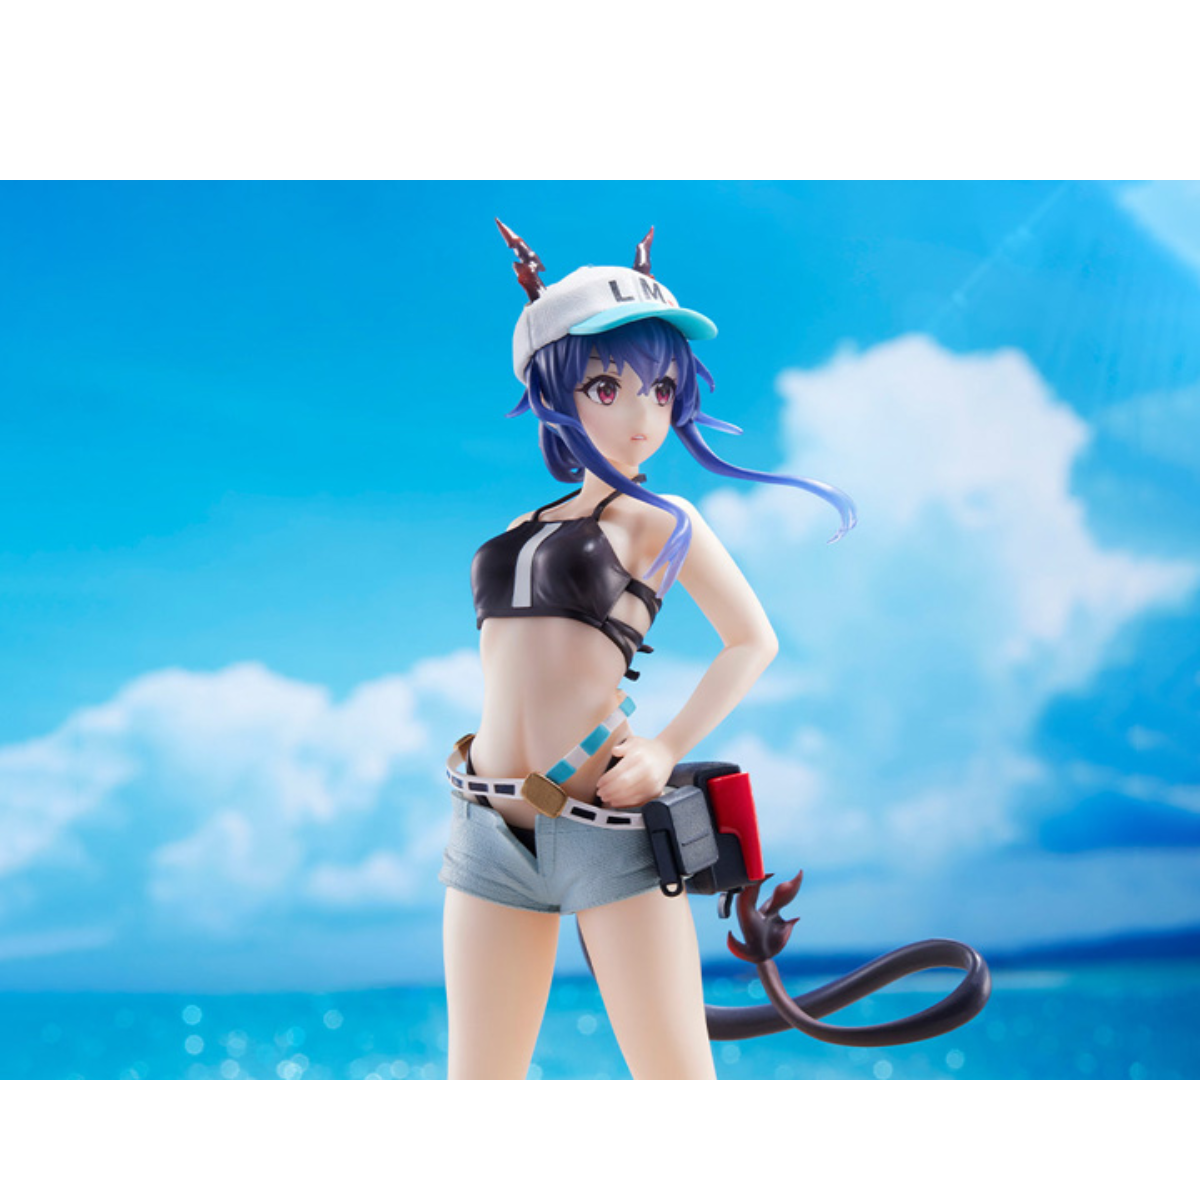 Arknights Coreful Figure "Ch'en" (Swimwear Ver.)-Taito-Ace Cards & Collectibles